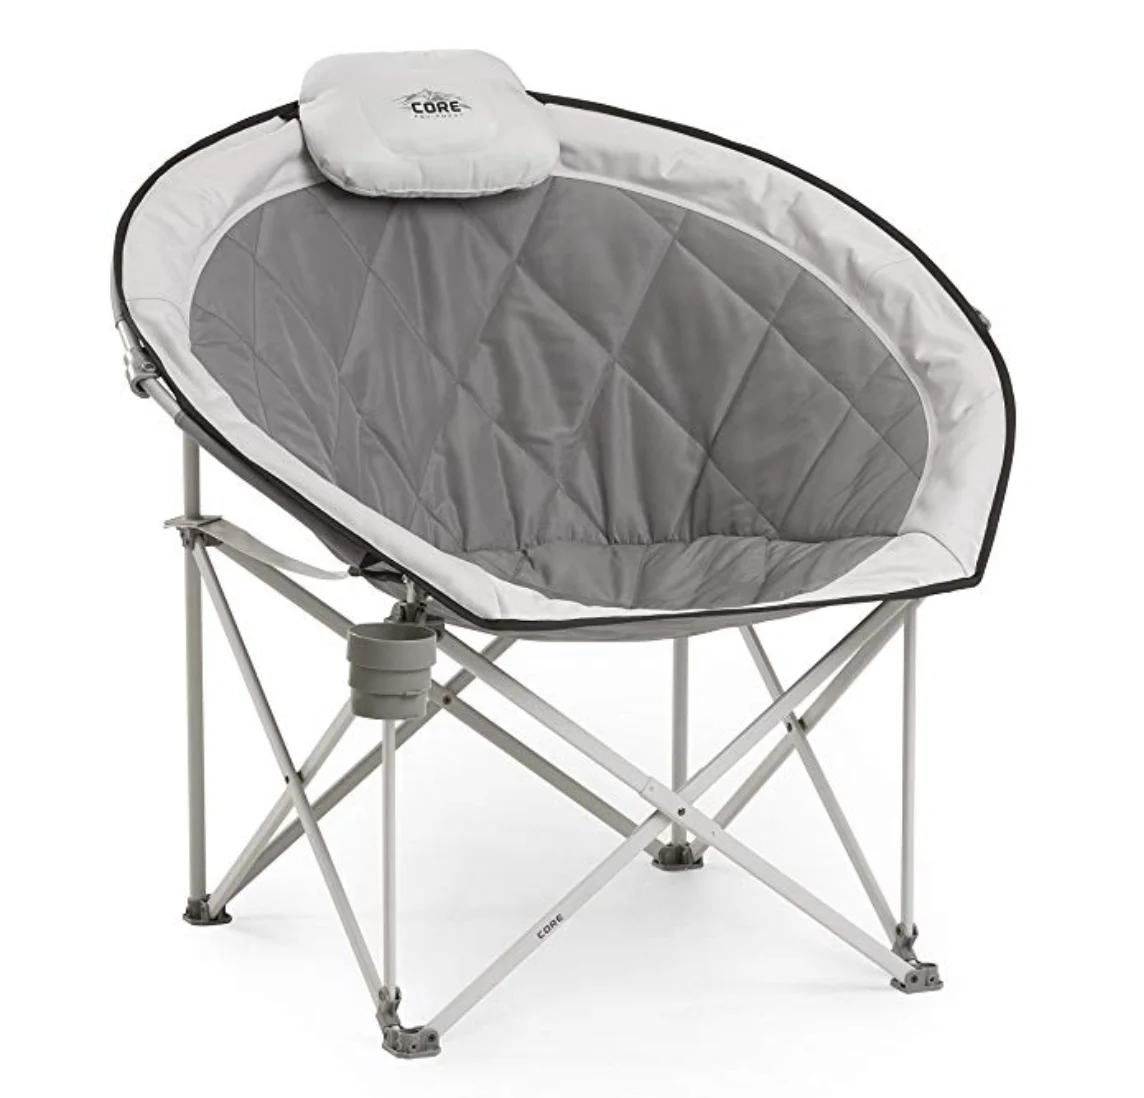 CORE Saucer Folding Camping Chair